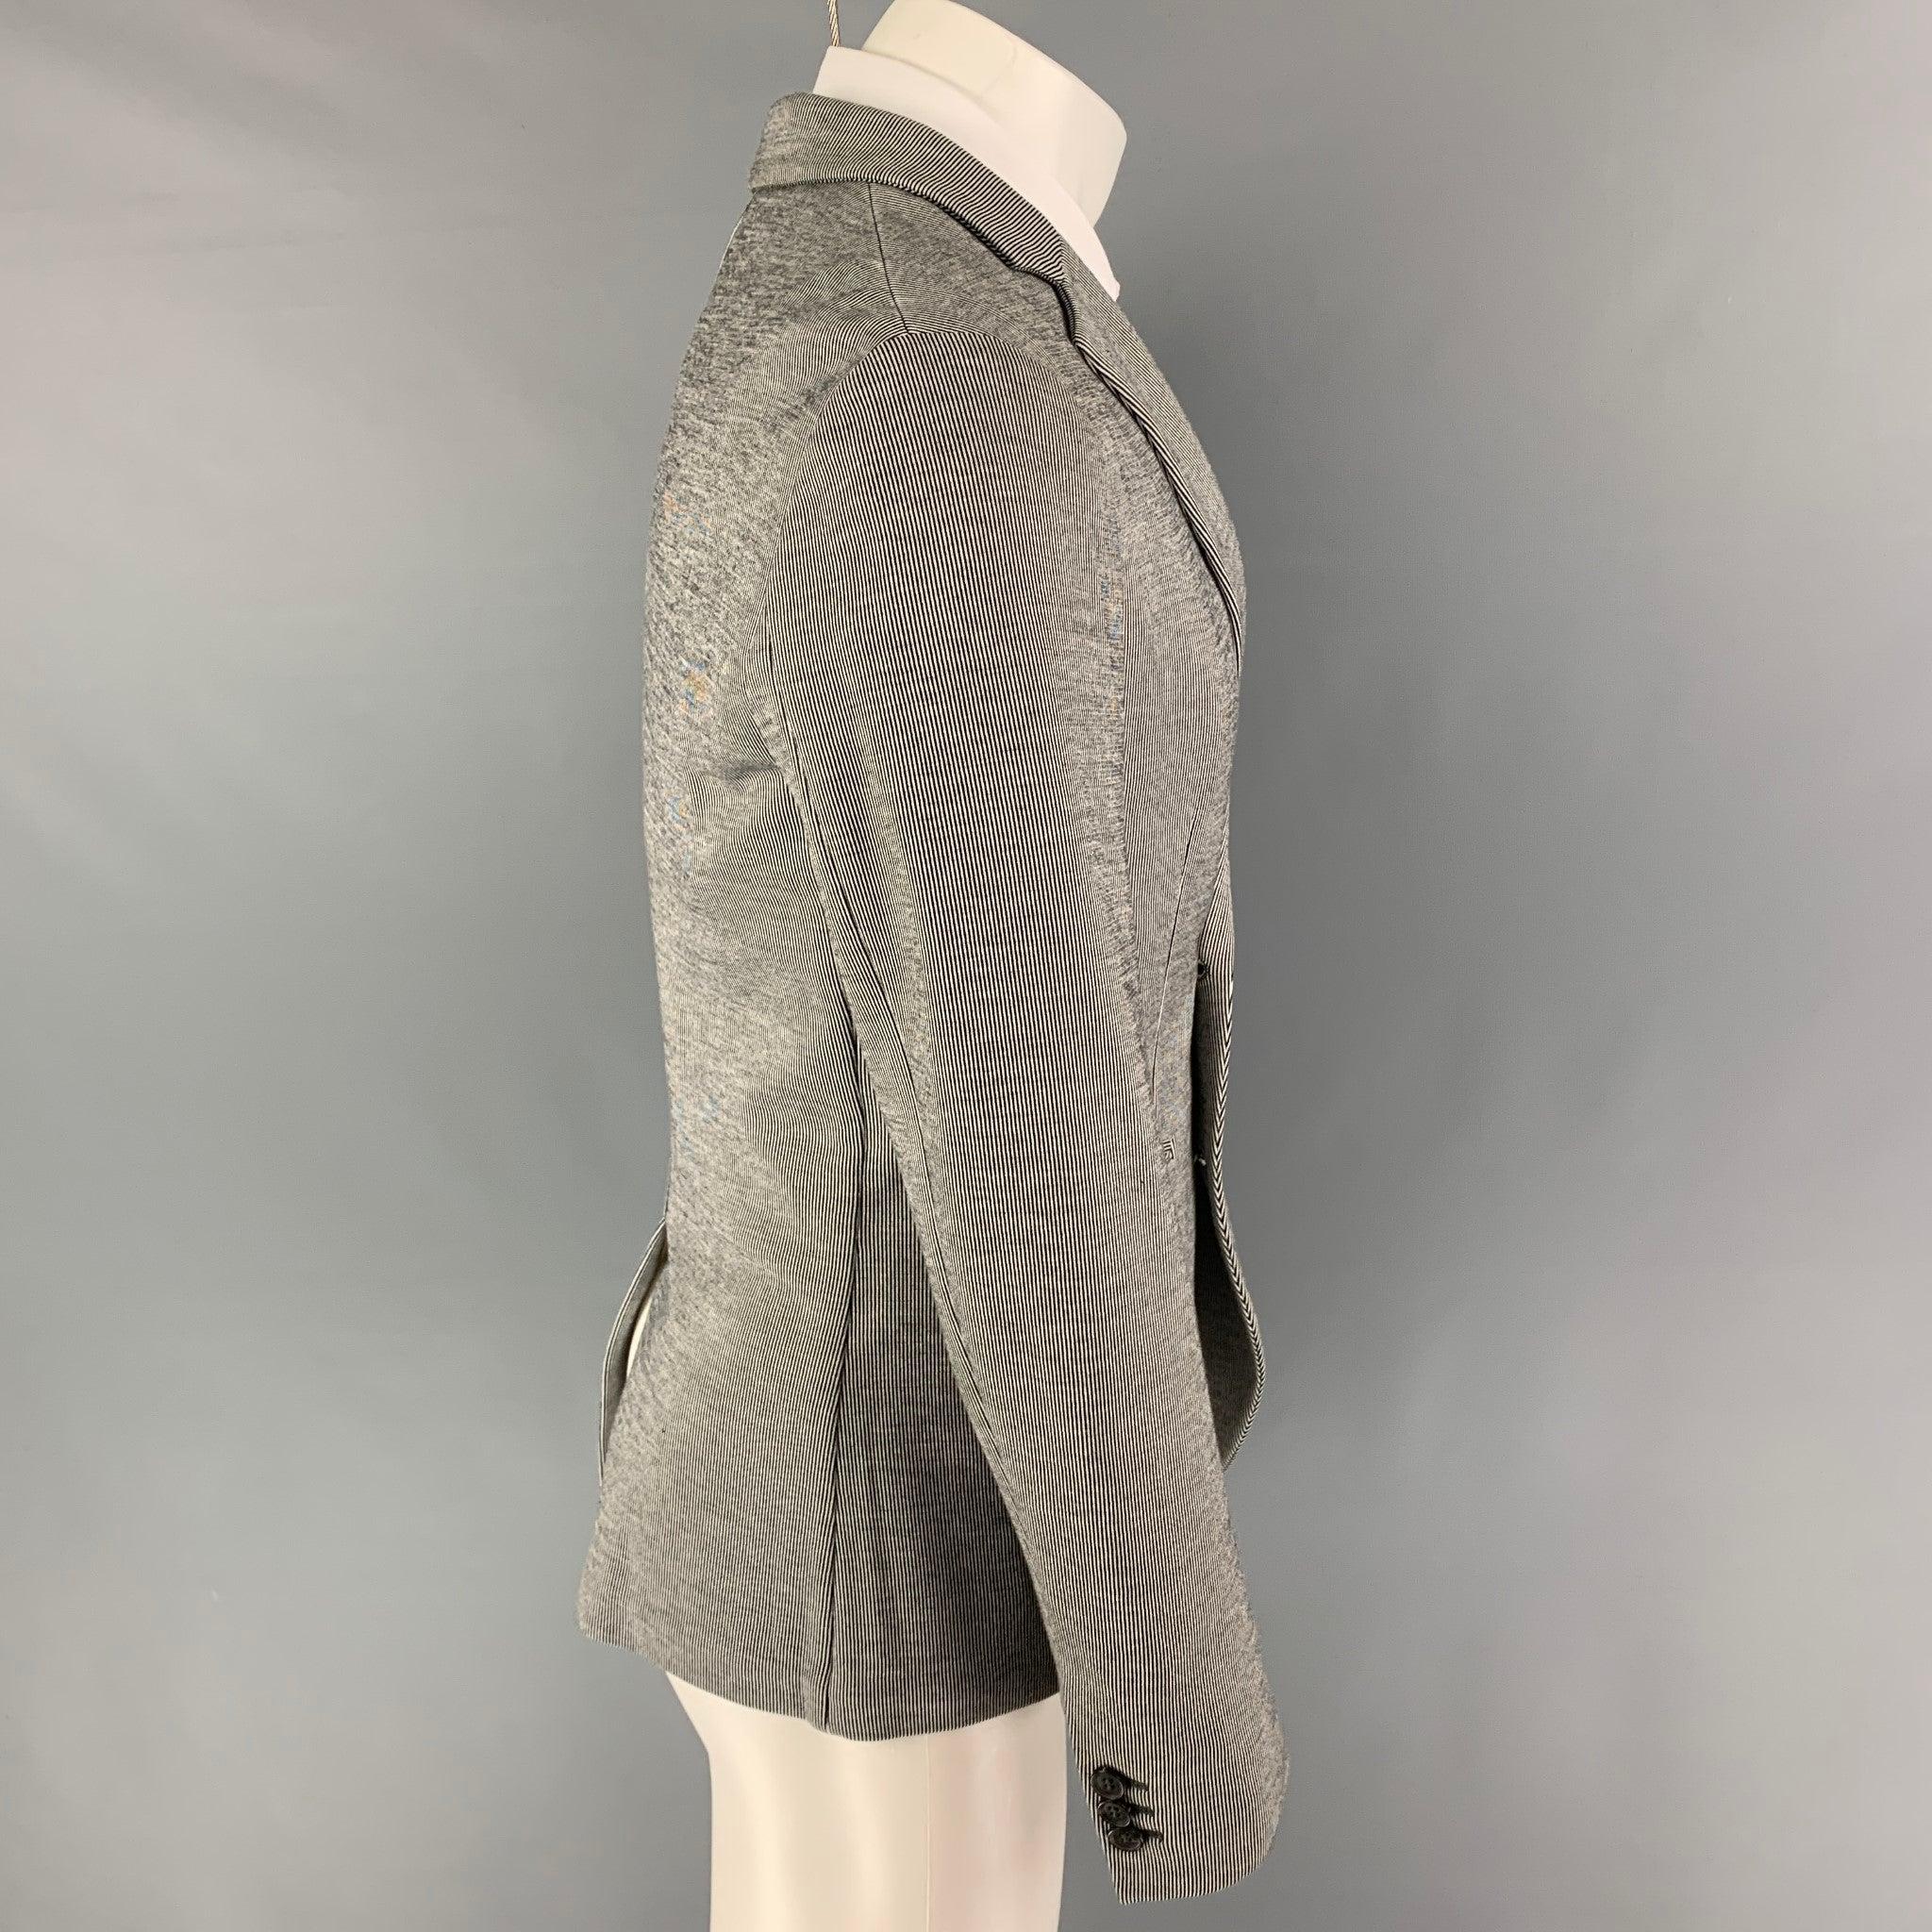 JOHN VARVATOS sport coat comes in a black & beige pinstripe cotton featuring a notch lapel, slit pockets, single back vent, and a double breasted closure. Made in Italy.
Very Good
Pre-Owned Condition. 

Marked:   46 

Measurements: 
 
Shoulder: 17.5